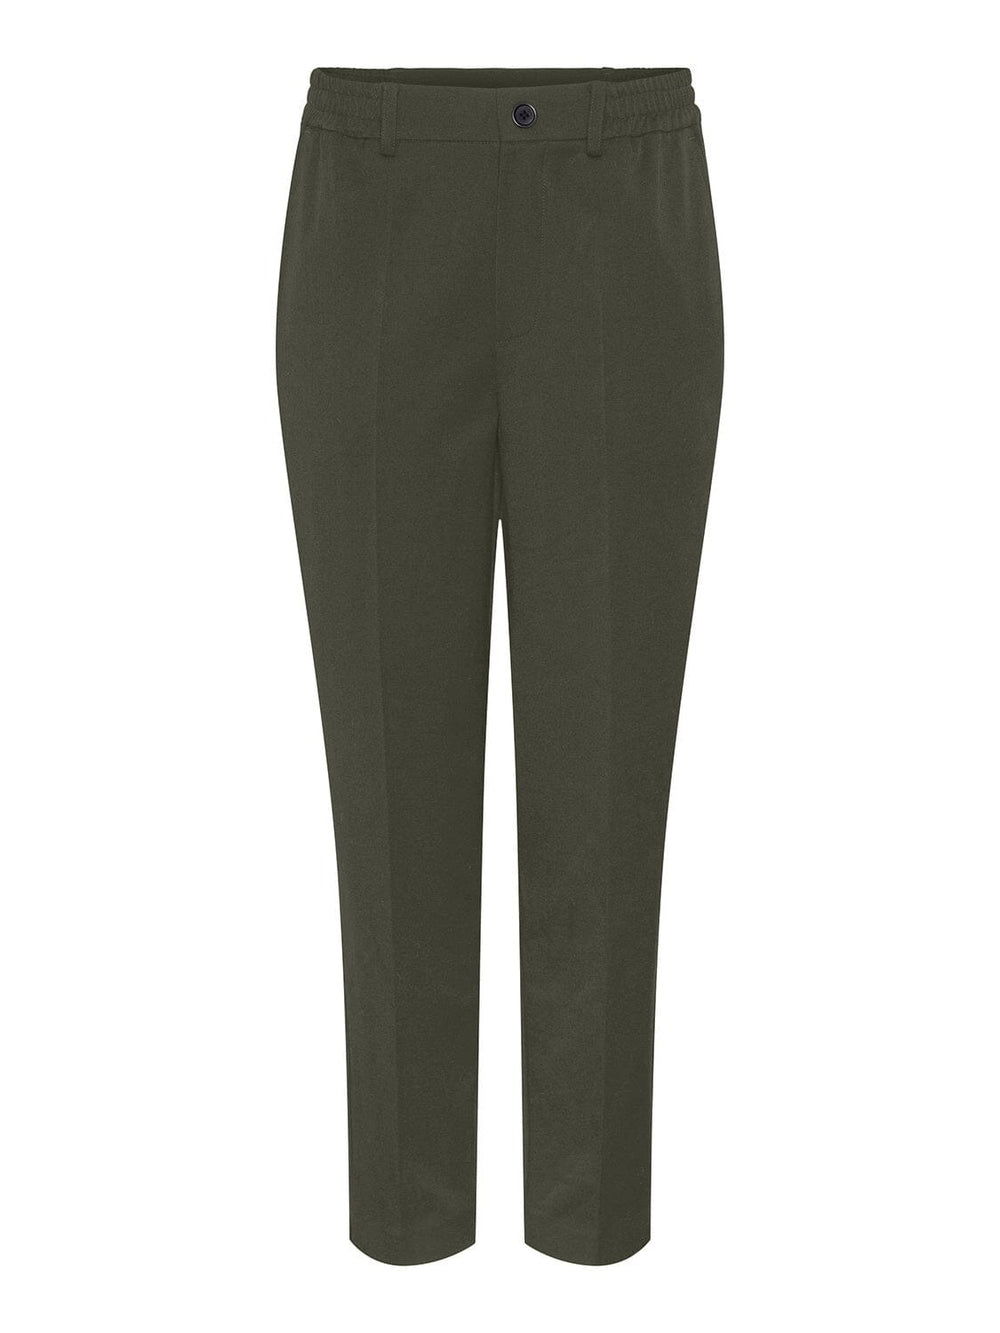 Pieces, Pccamil Hw Ankle Pant, Deep Lichen Green